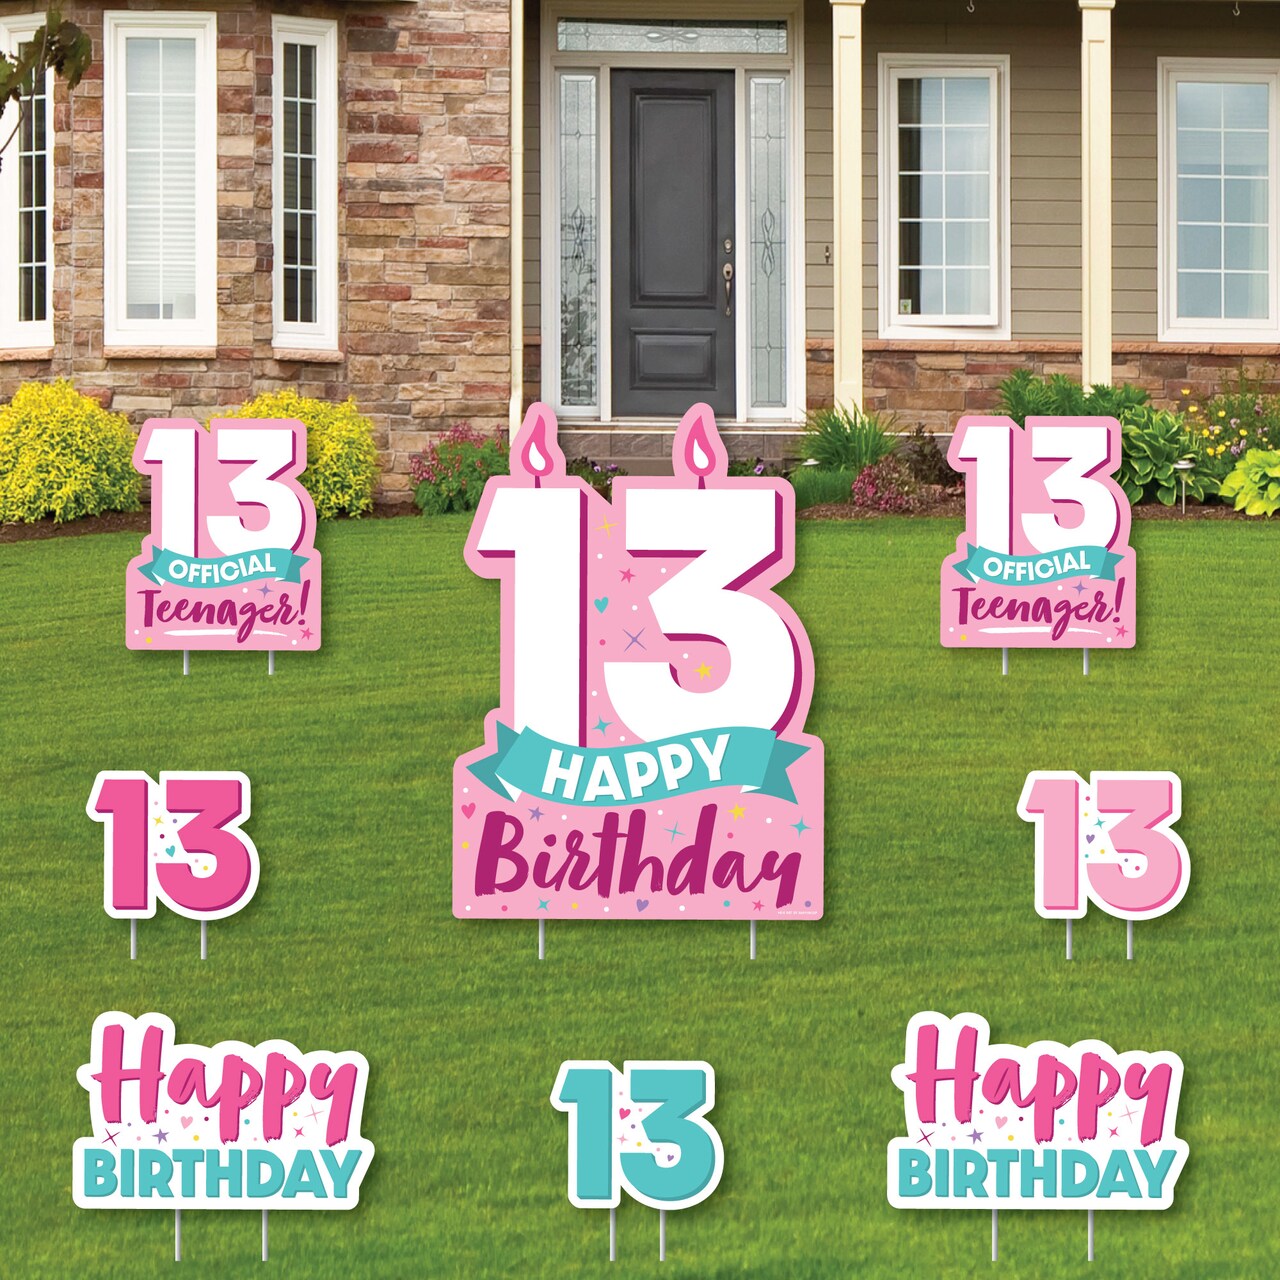 Big Dot of Happiness Girl 13th Birthday - Yard Sign and Outdoor Lawn Decorations - Official Teenager Birthday Party Yard Signs - Set of 8